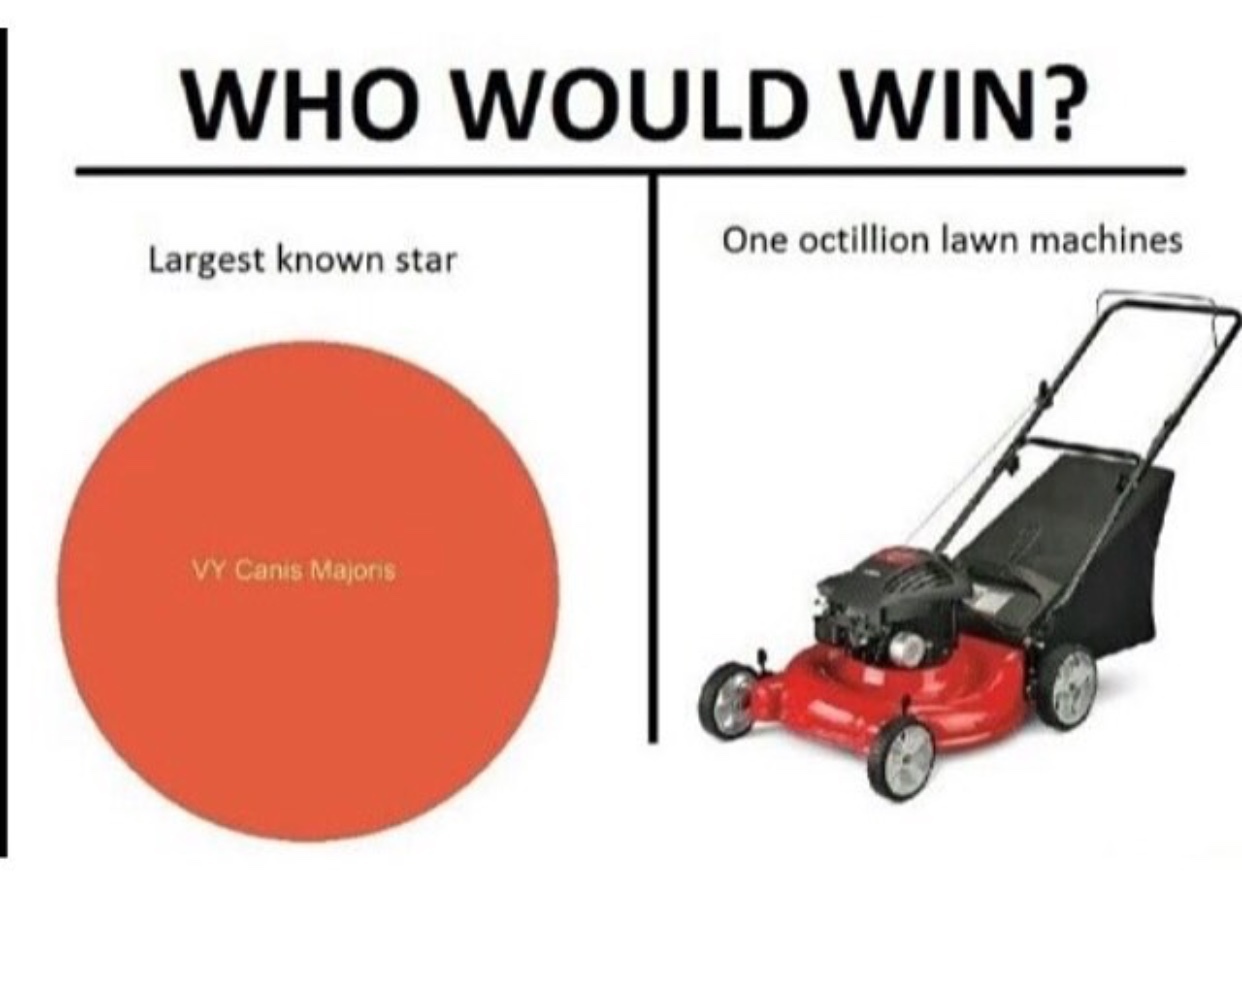 I think the gravity of the lawnmower a would pull it, but that's only if they're in a planet sized bunch, and not spread out - meme